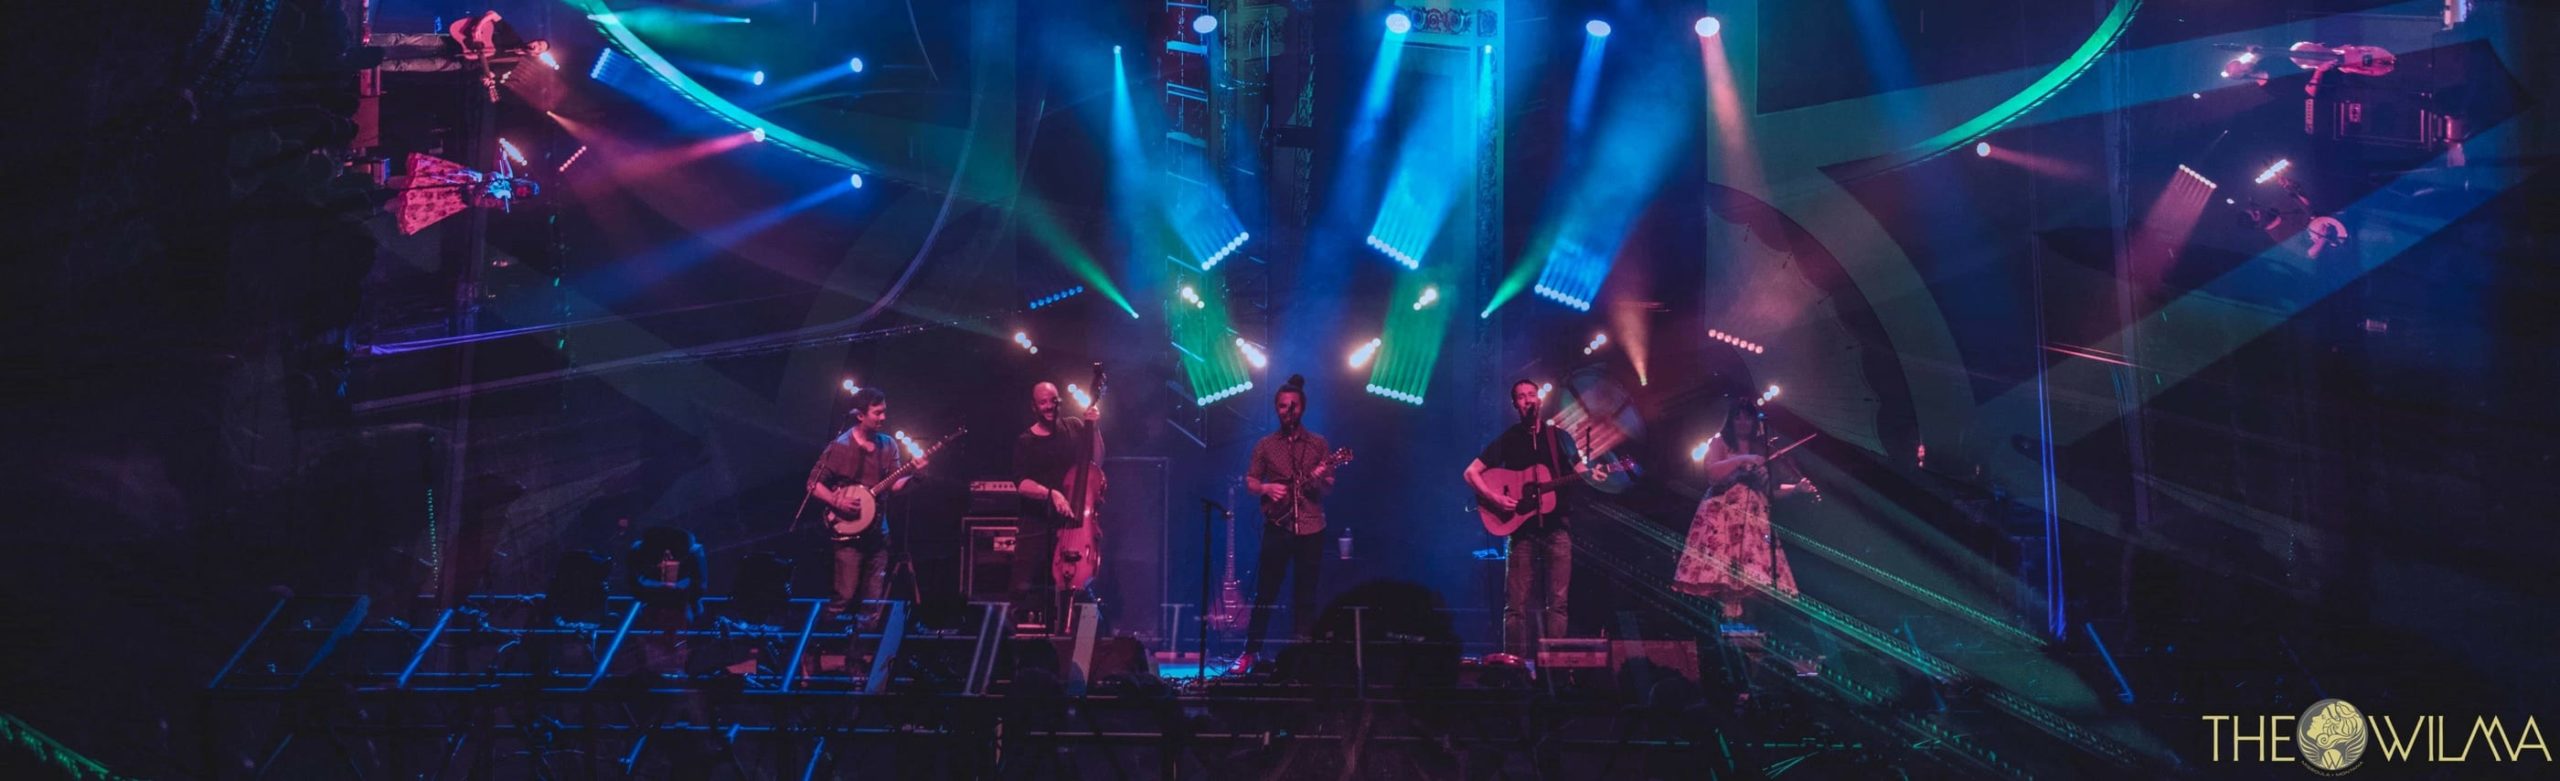 Event Info: Yonder Mountain String Band at The Wilma Image